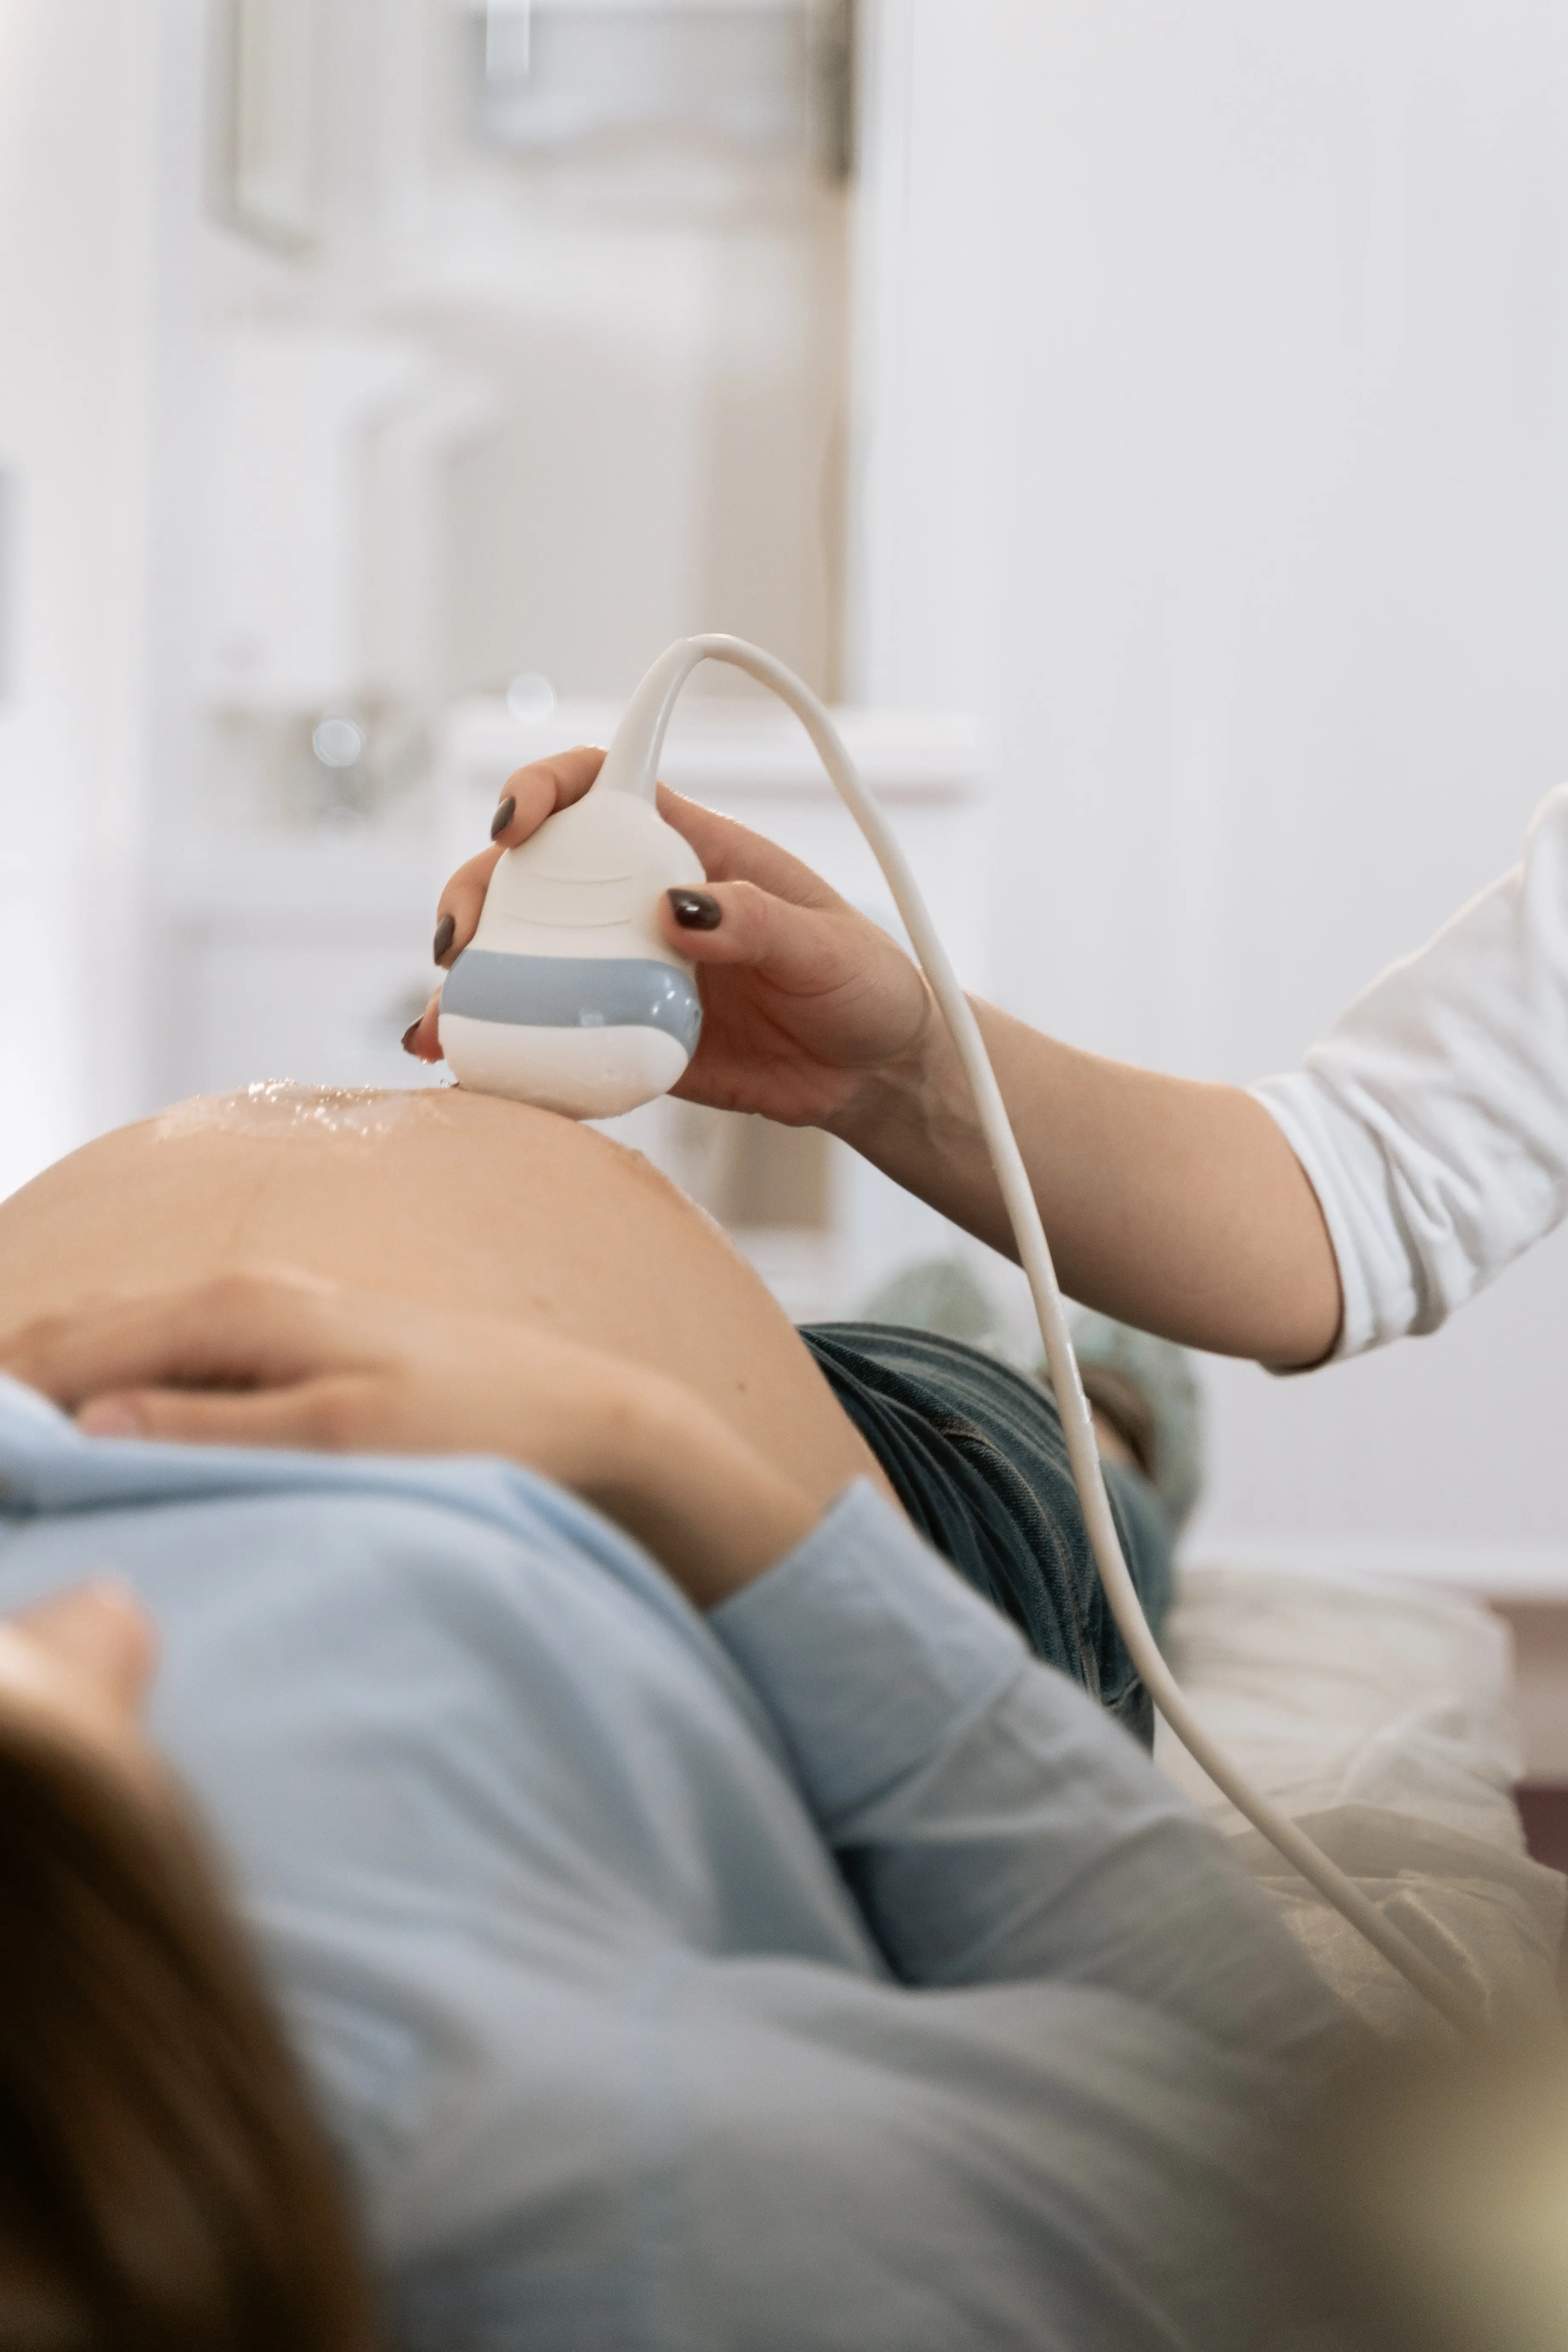 Pregnant woman is examined with an ultrasound machine